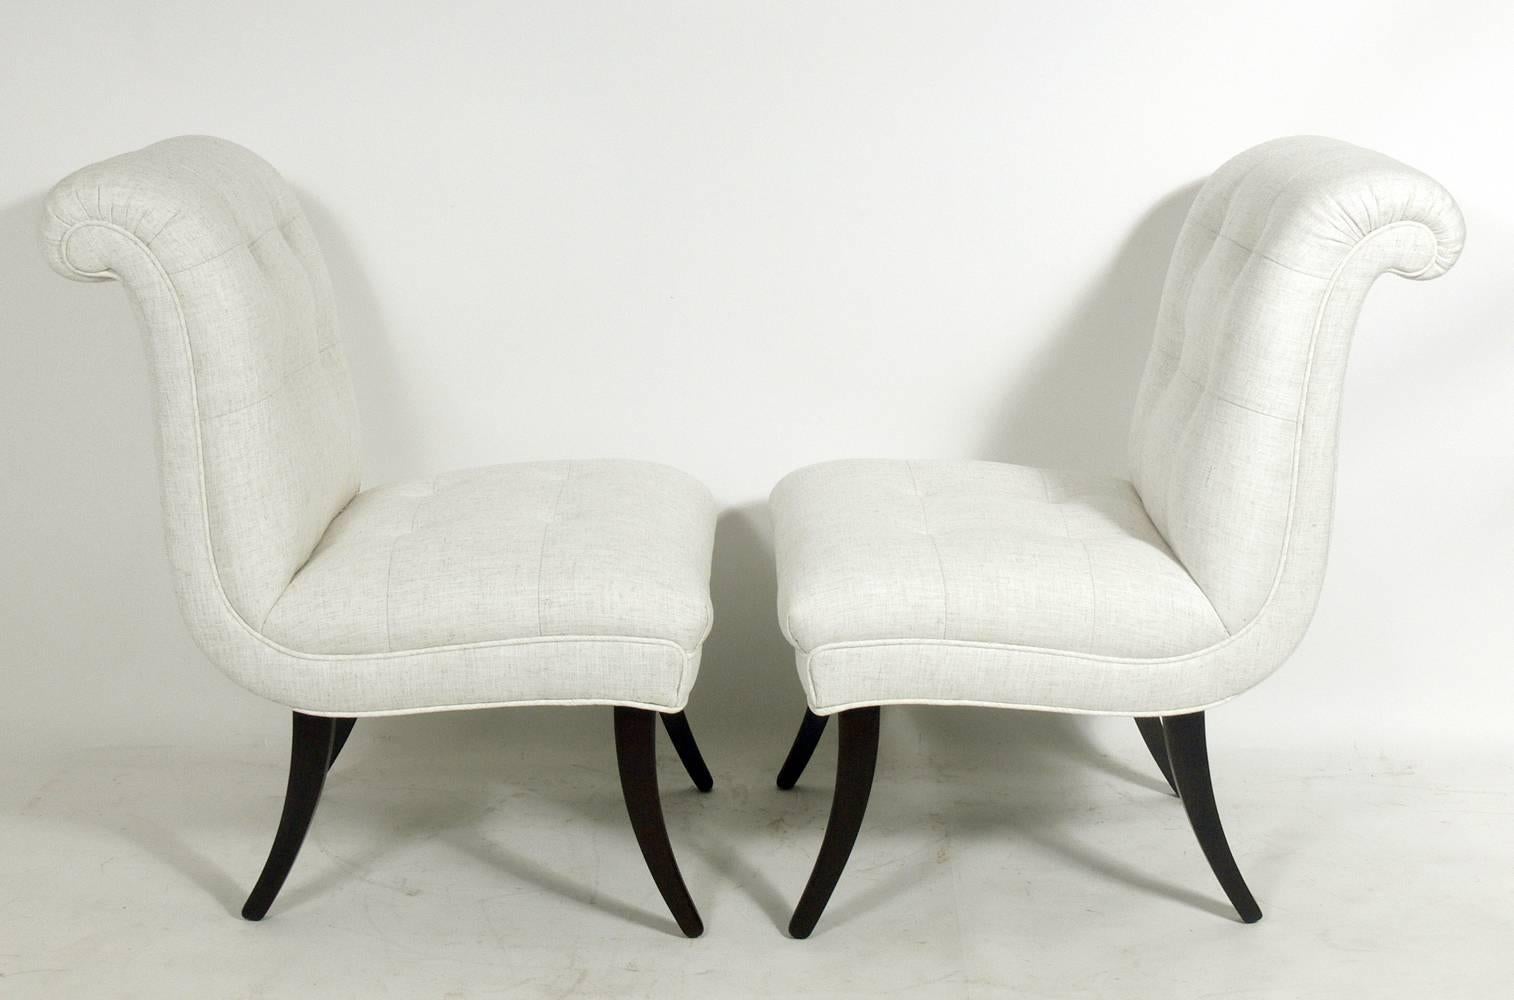 Pair of curvaceous slipper chairs, American, circa 1940s. Glamorous form with dramatic scroll backs, button tufting and sexy curvaceous legs. Reupholstered in an ivory color textured linen style upholstery with refinished ultra-deep brown color